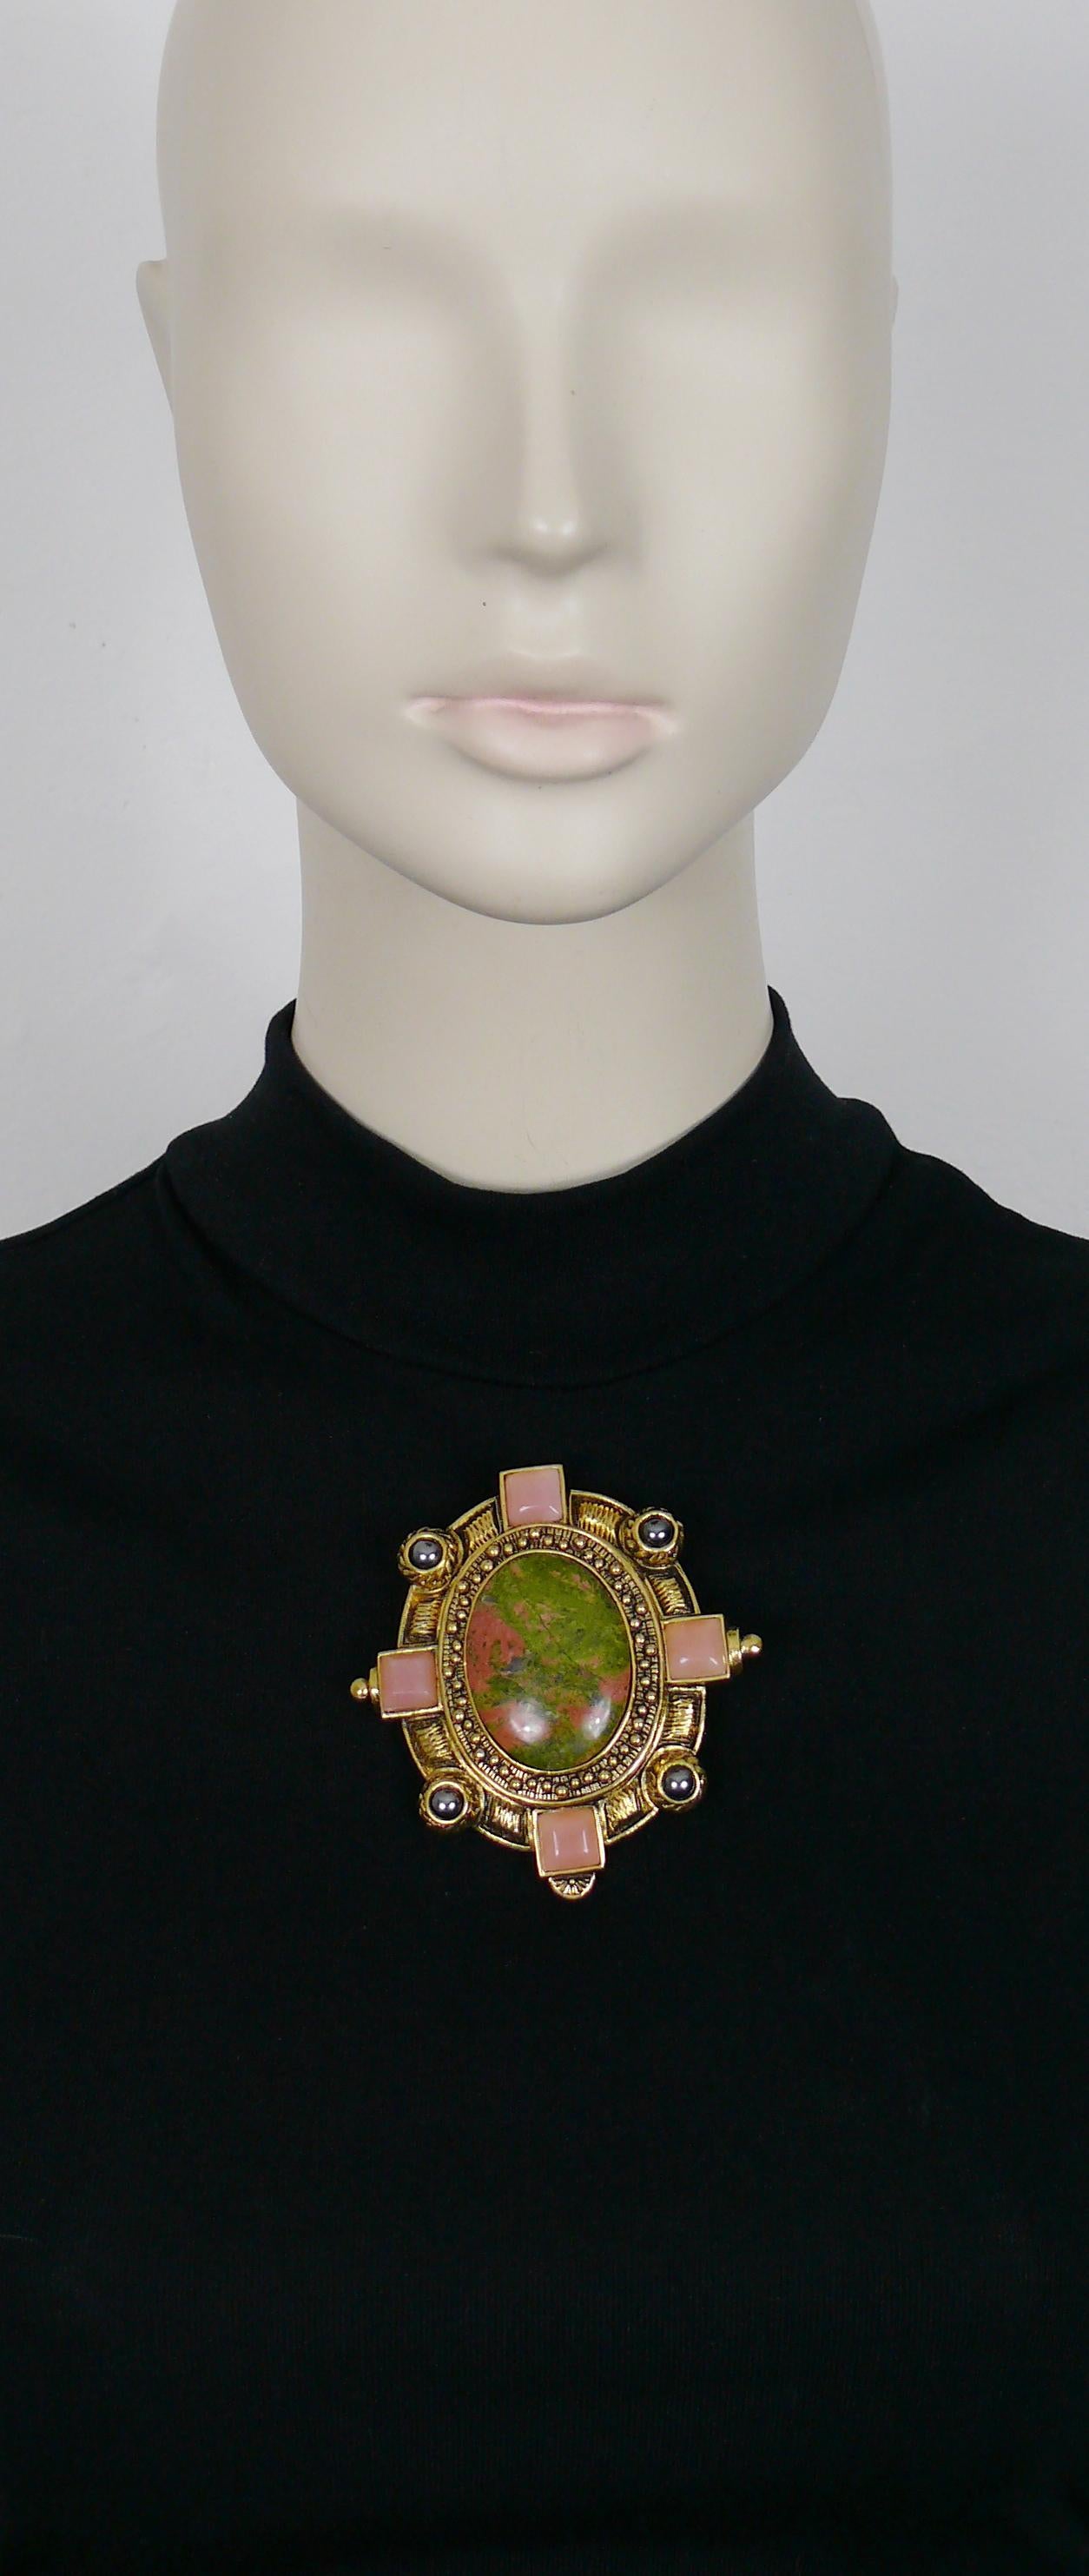 CHRISTIAN DIOR BOUTIQUE vintage massive antiqued gold toned brooch embellished with a large oval hard stone cabochon (marbled green and pink colours), hematite colour beads and square baby pink glass cabochons.

Could be worn as a brooch or